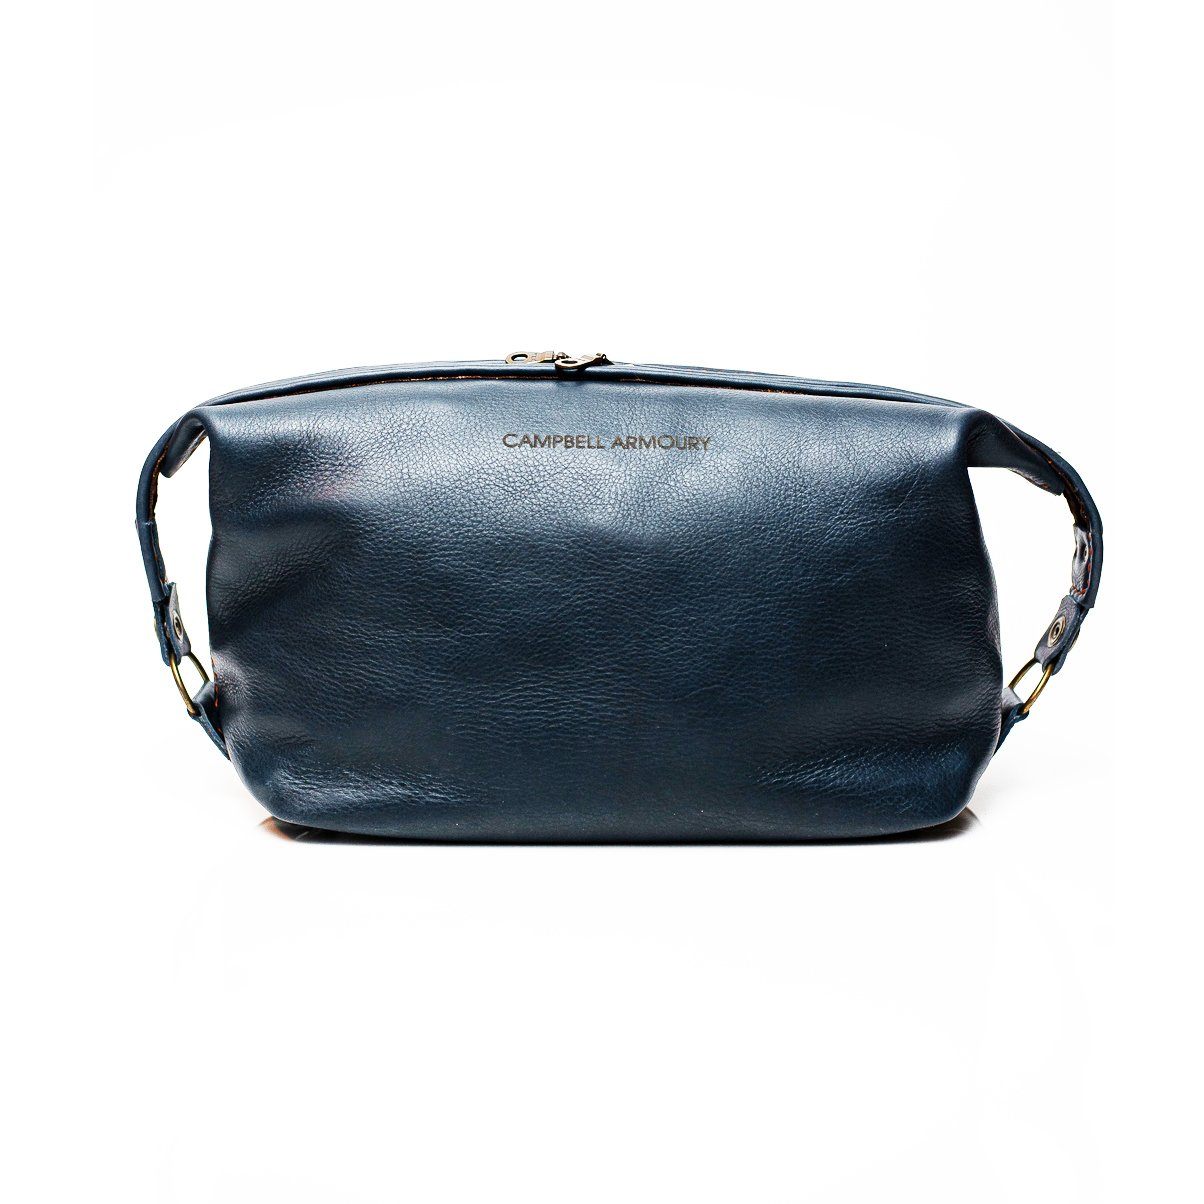 Campbell Armoury Leather Toiletry Bag Bags & Handbags Campbell Armoury navy 